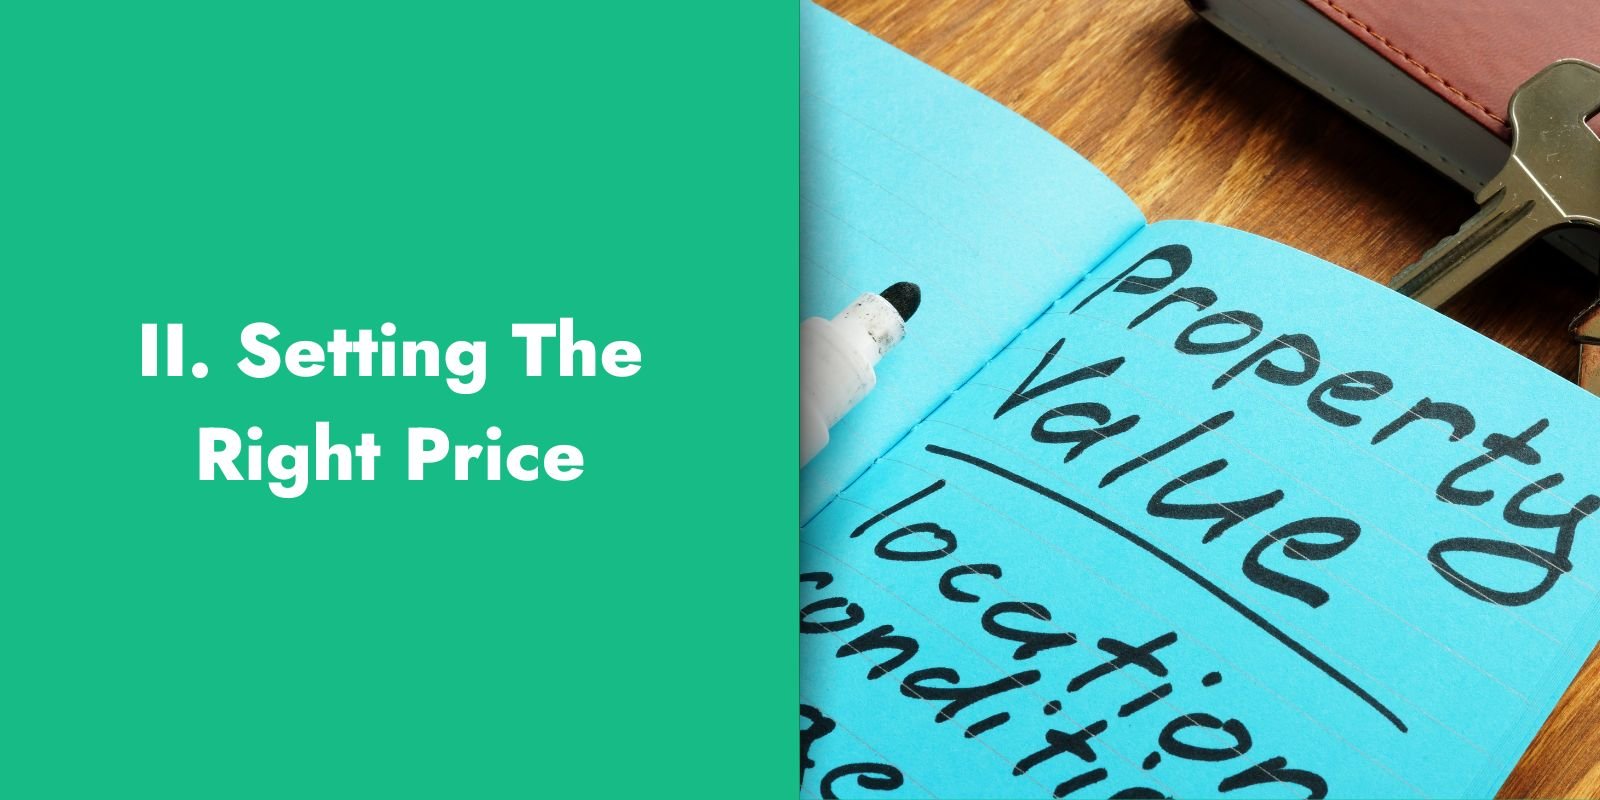 II. Setting The Right Price